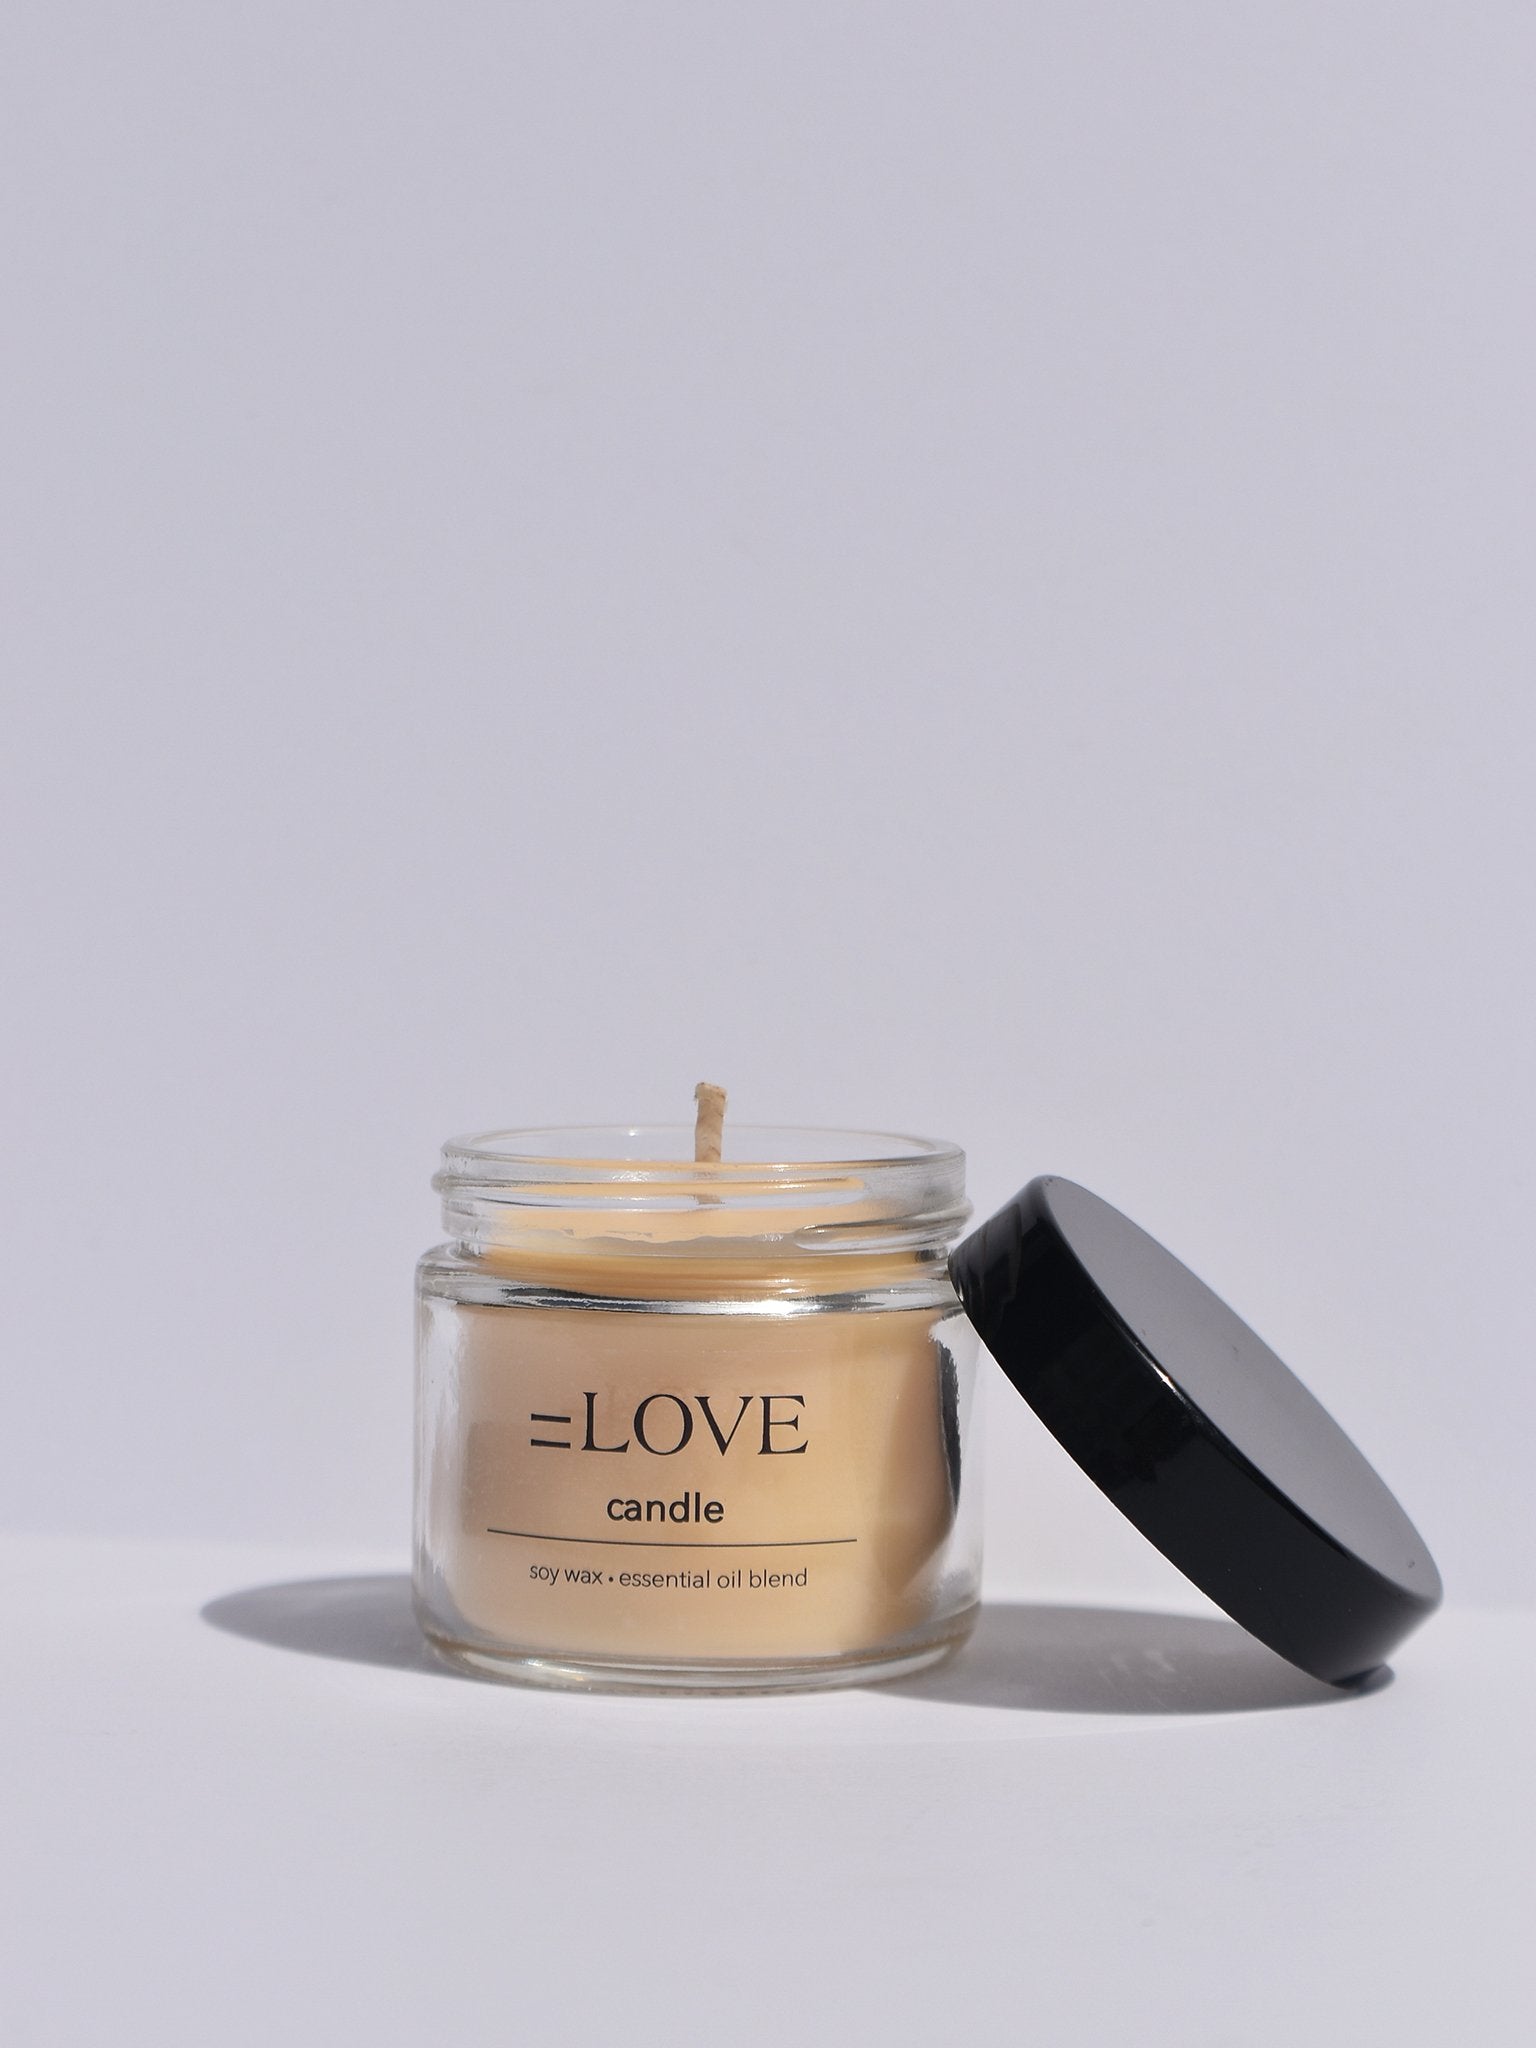 =LOVE Candle